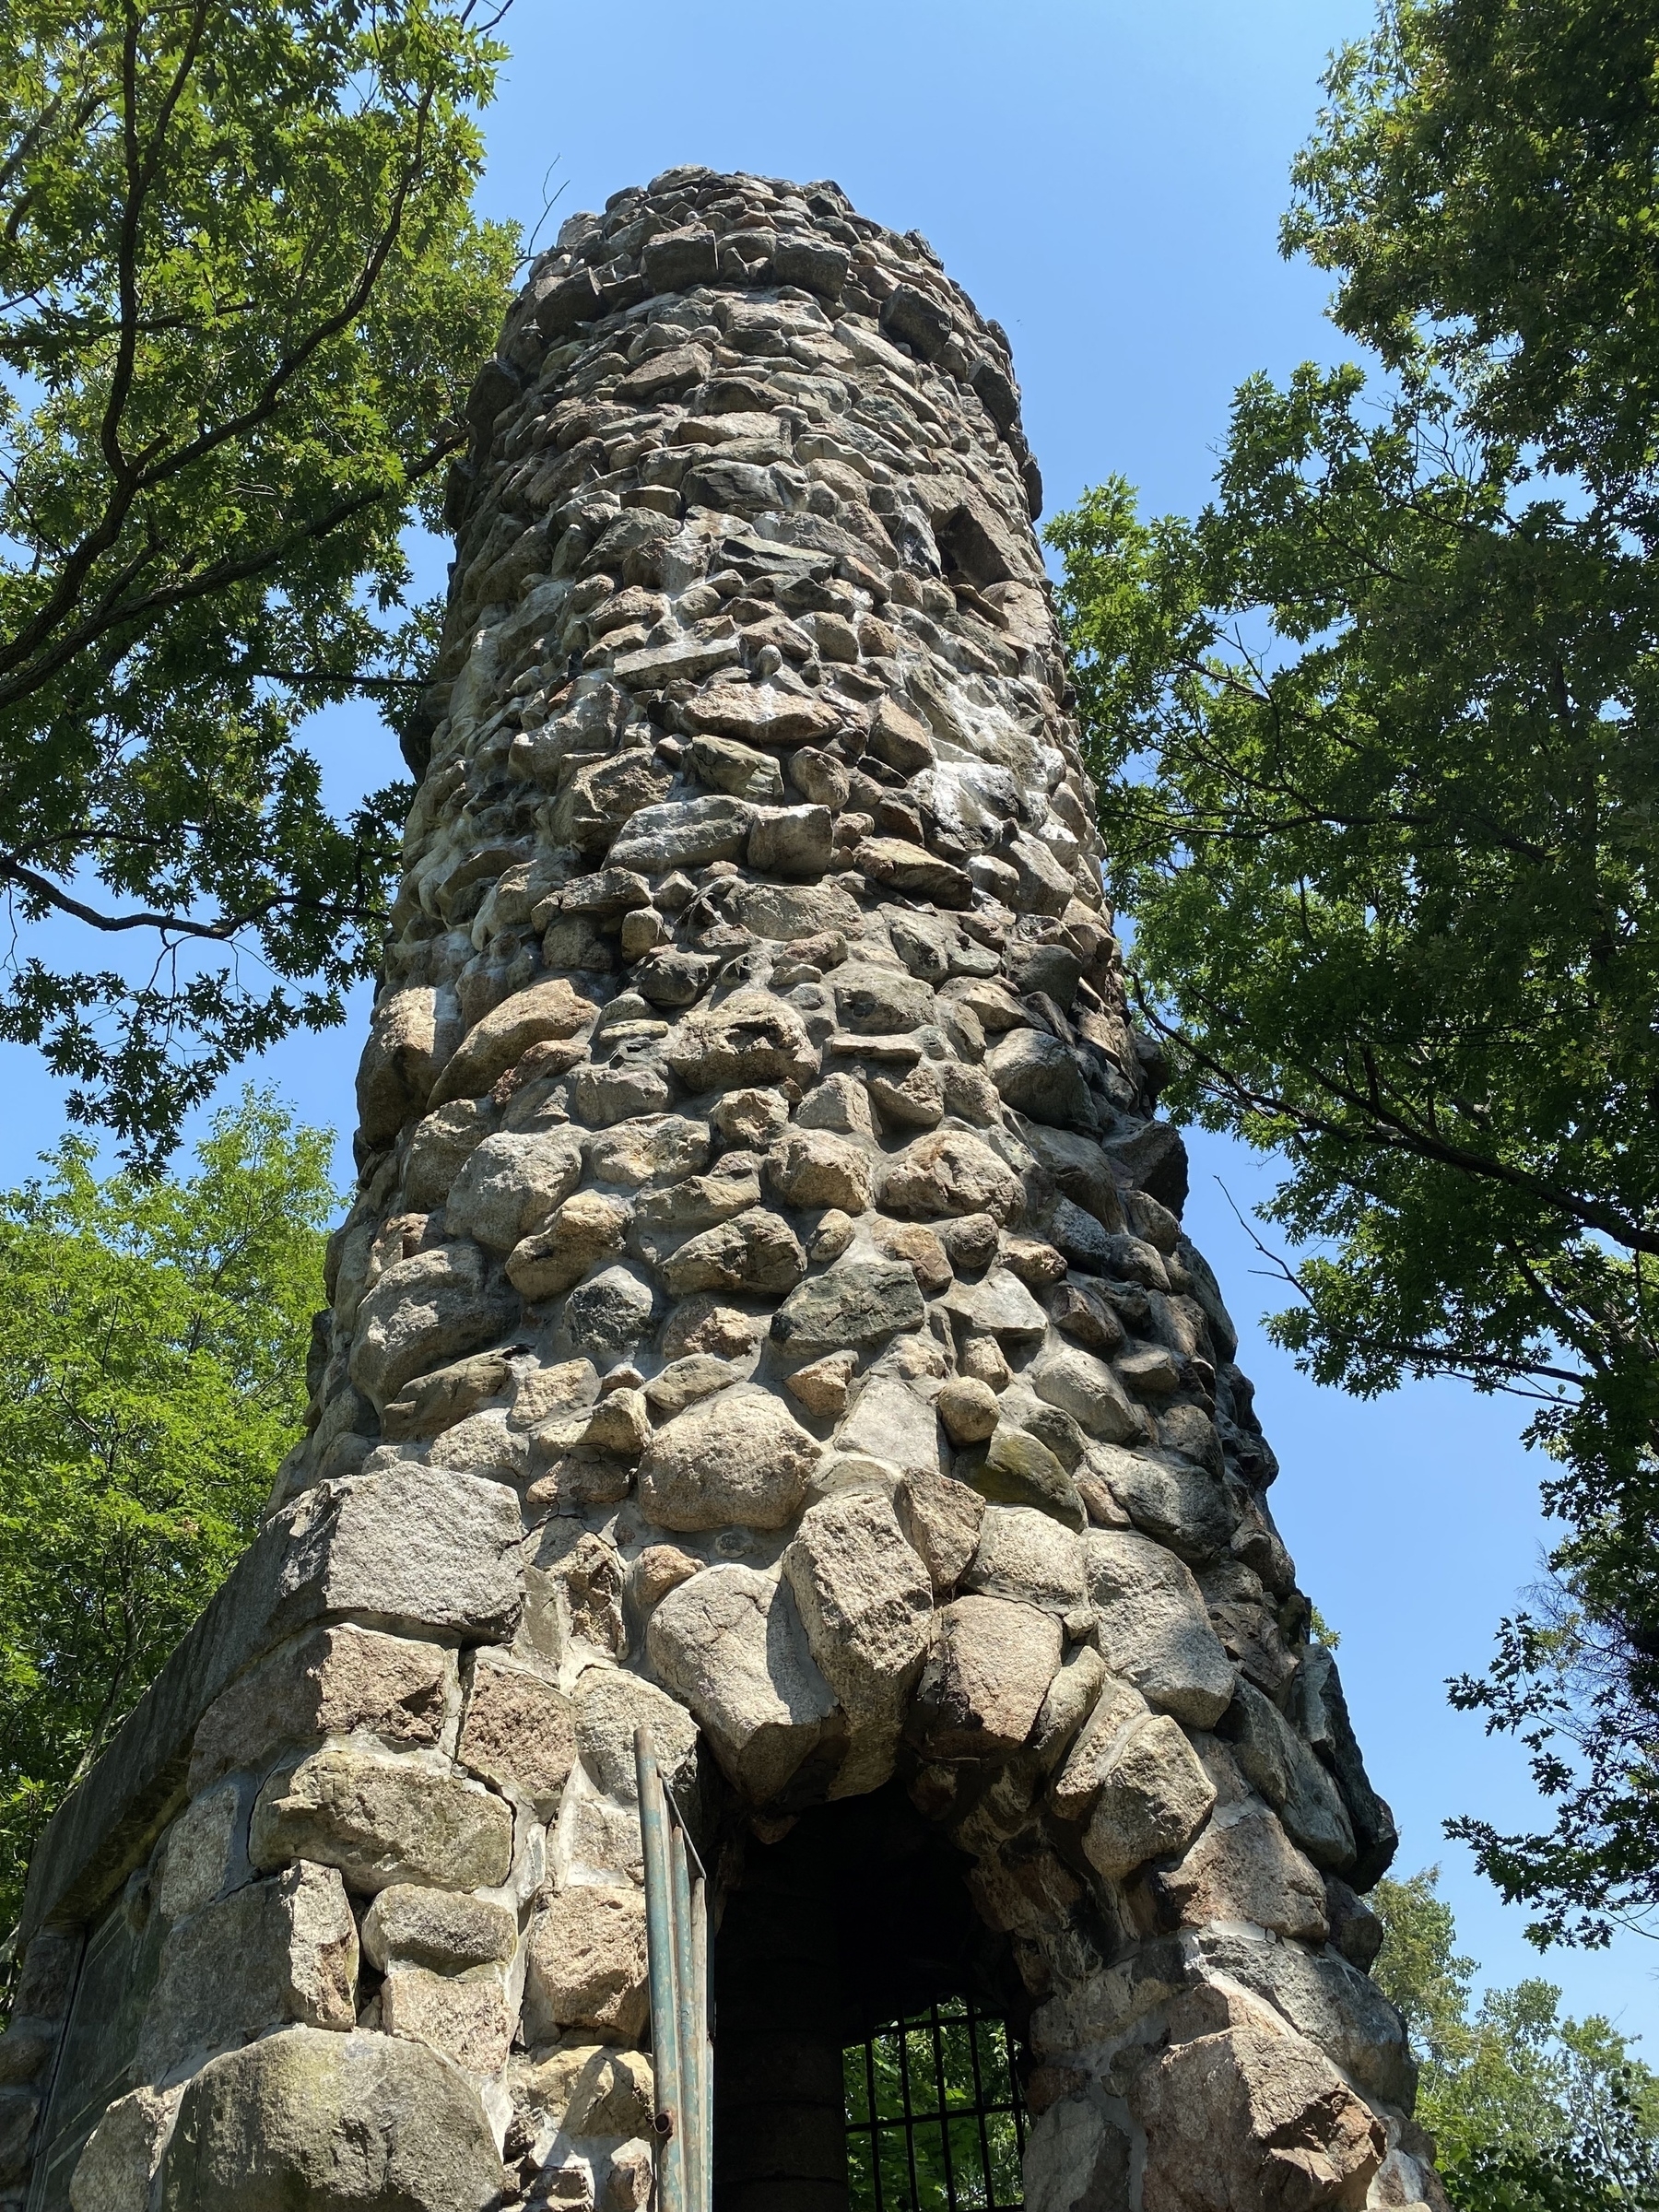 View of a stone tower with trees on either side.